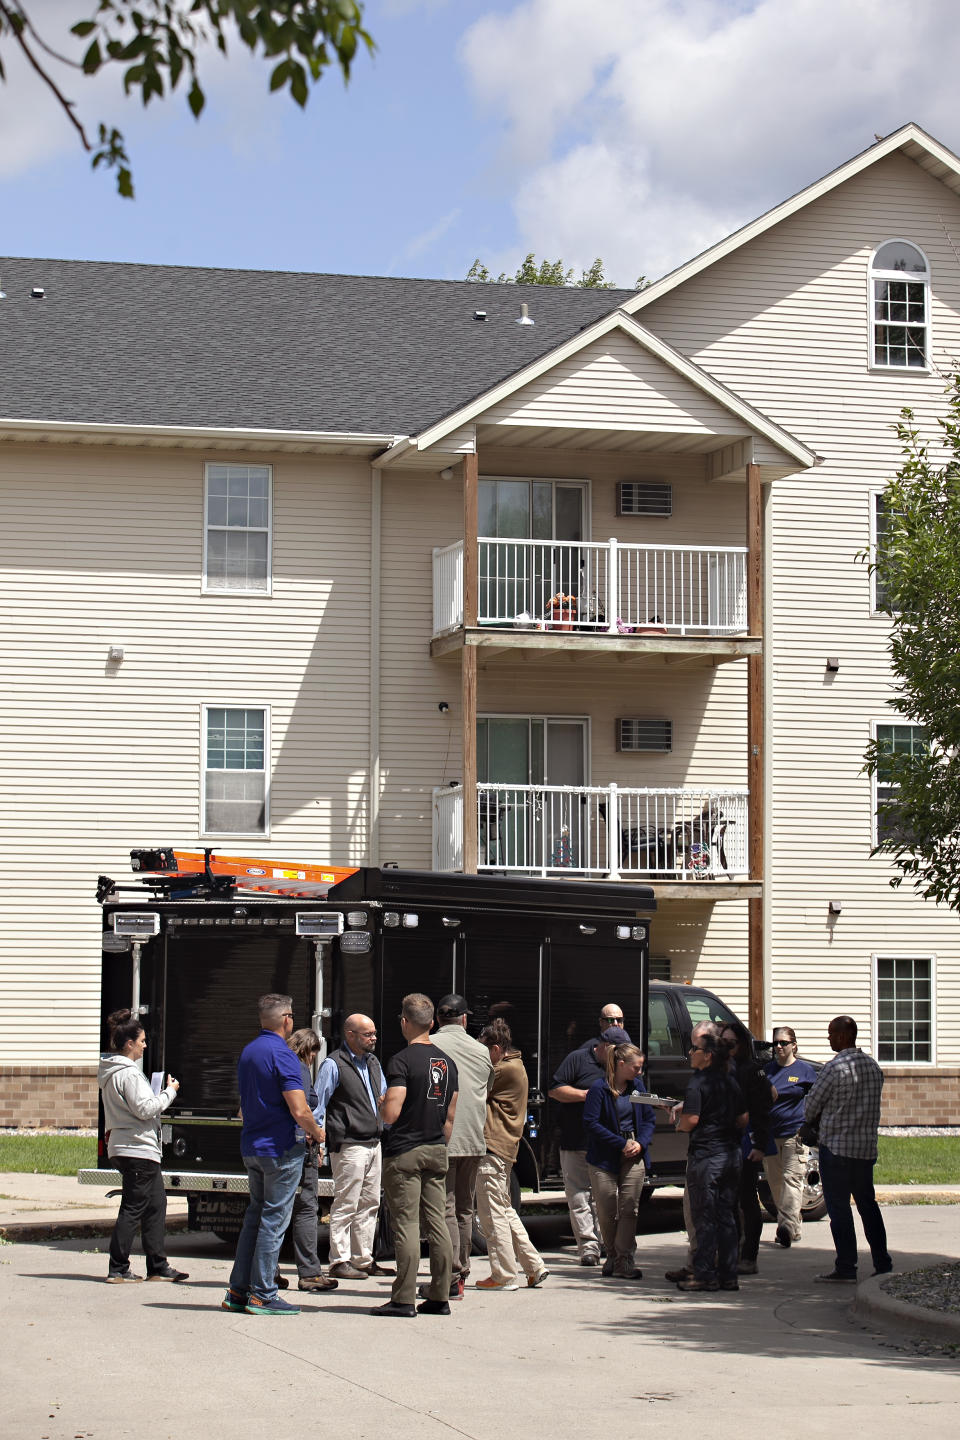 Investigators stand outside the Bluemont Village Apartments, Saturday, July 15, 2023, in Fargo, N.D. The suspect in a fatal shooting a day earlier involving local police officers was connected to at least one apartment unit at this location. Both the suspect and one police officer were killed. (AP Photo/Ann Arbor Miller)